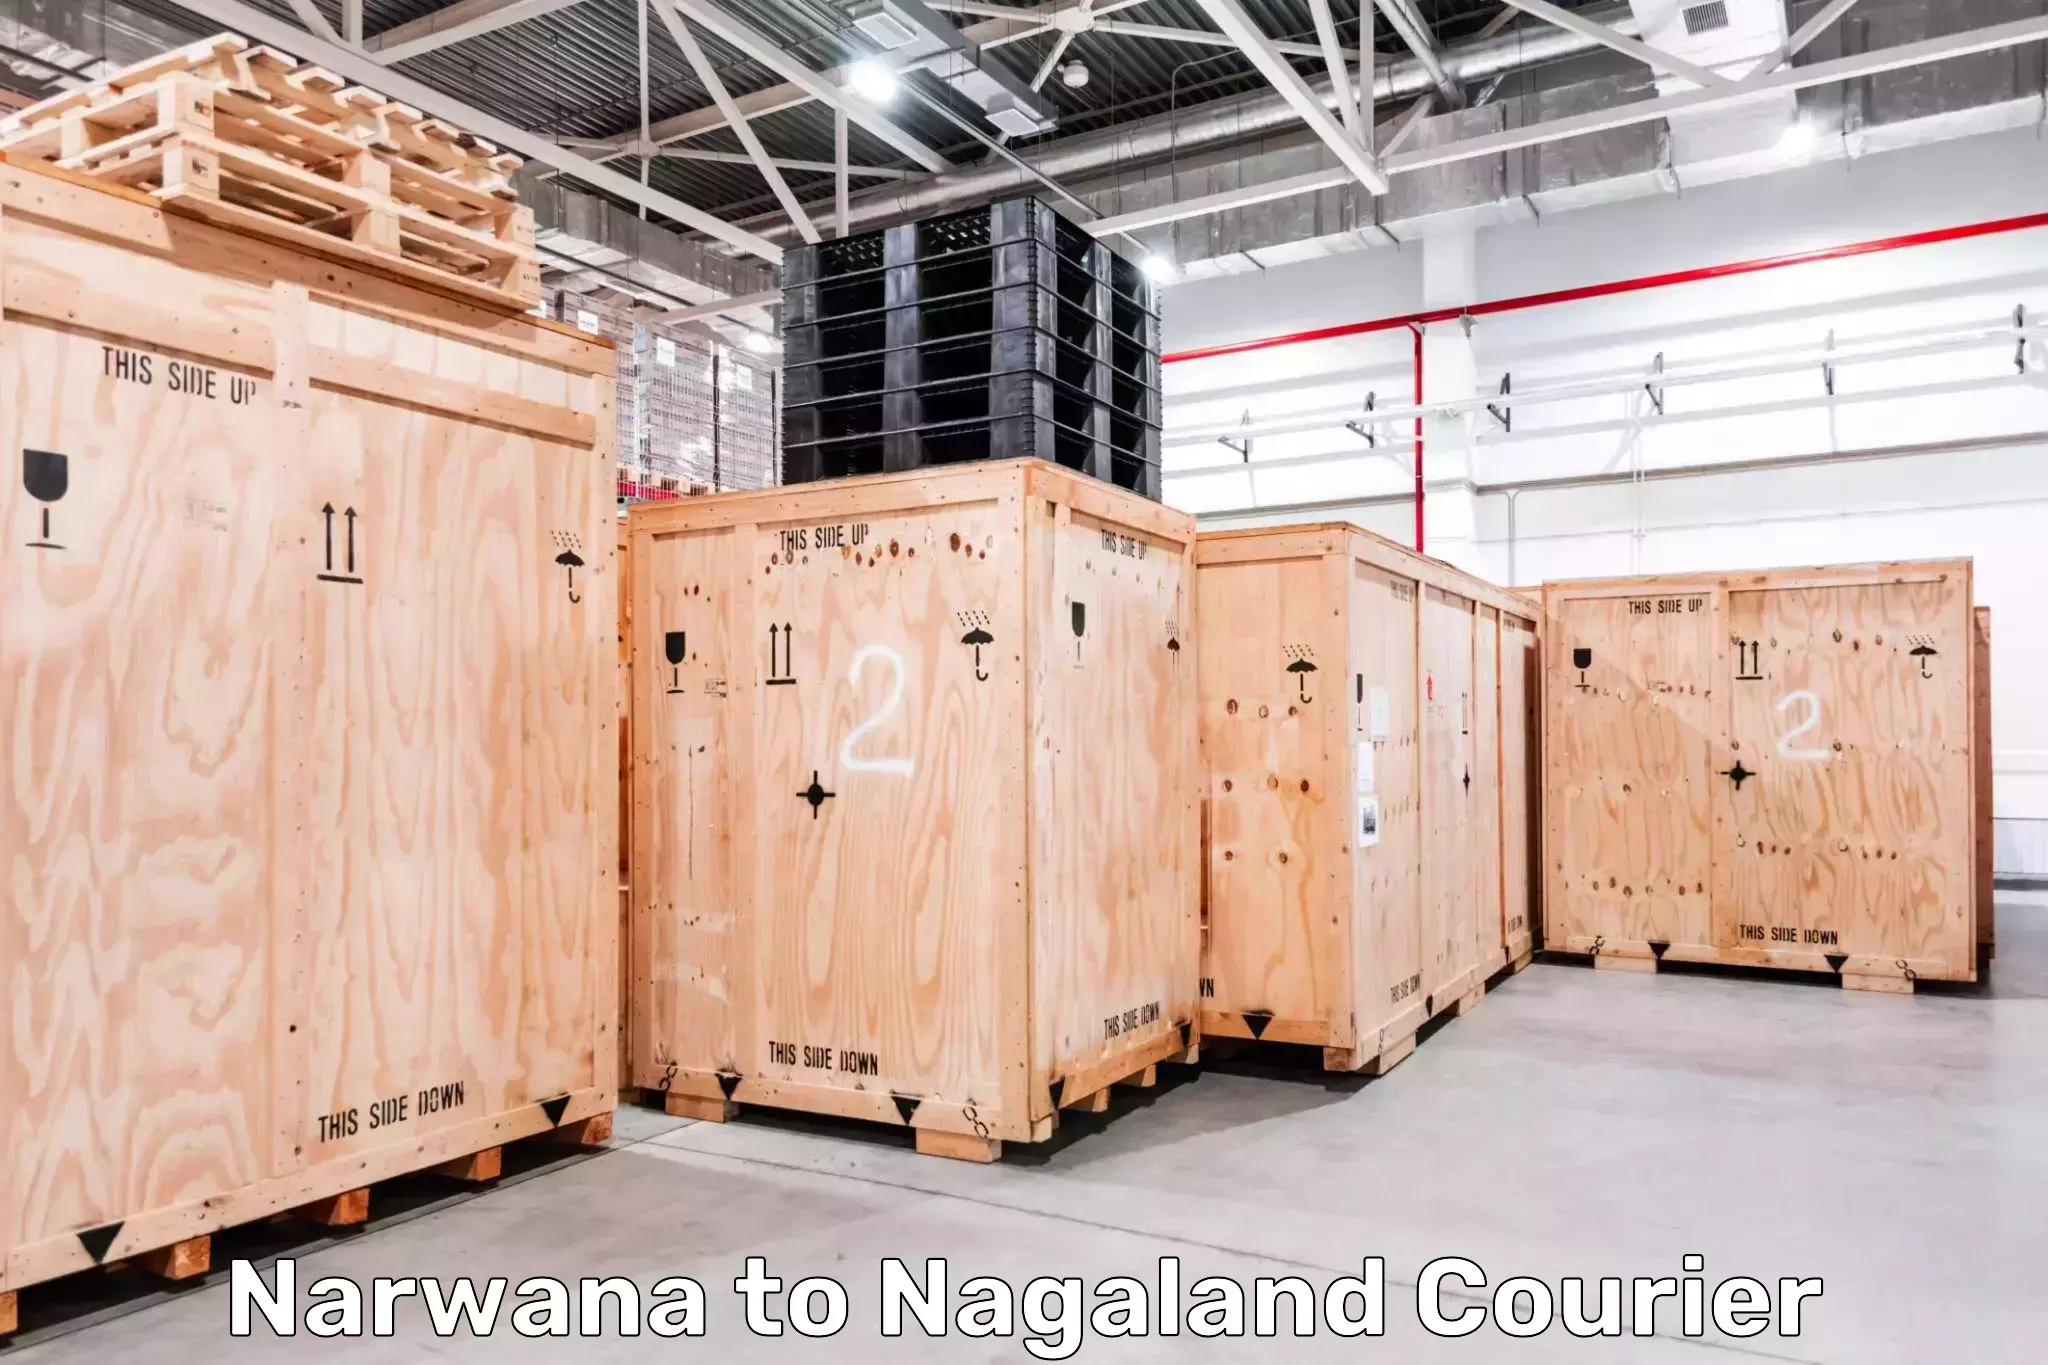 Nationwide delivery network in Narwana to Dimapur